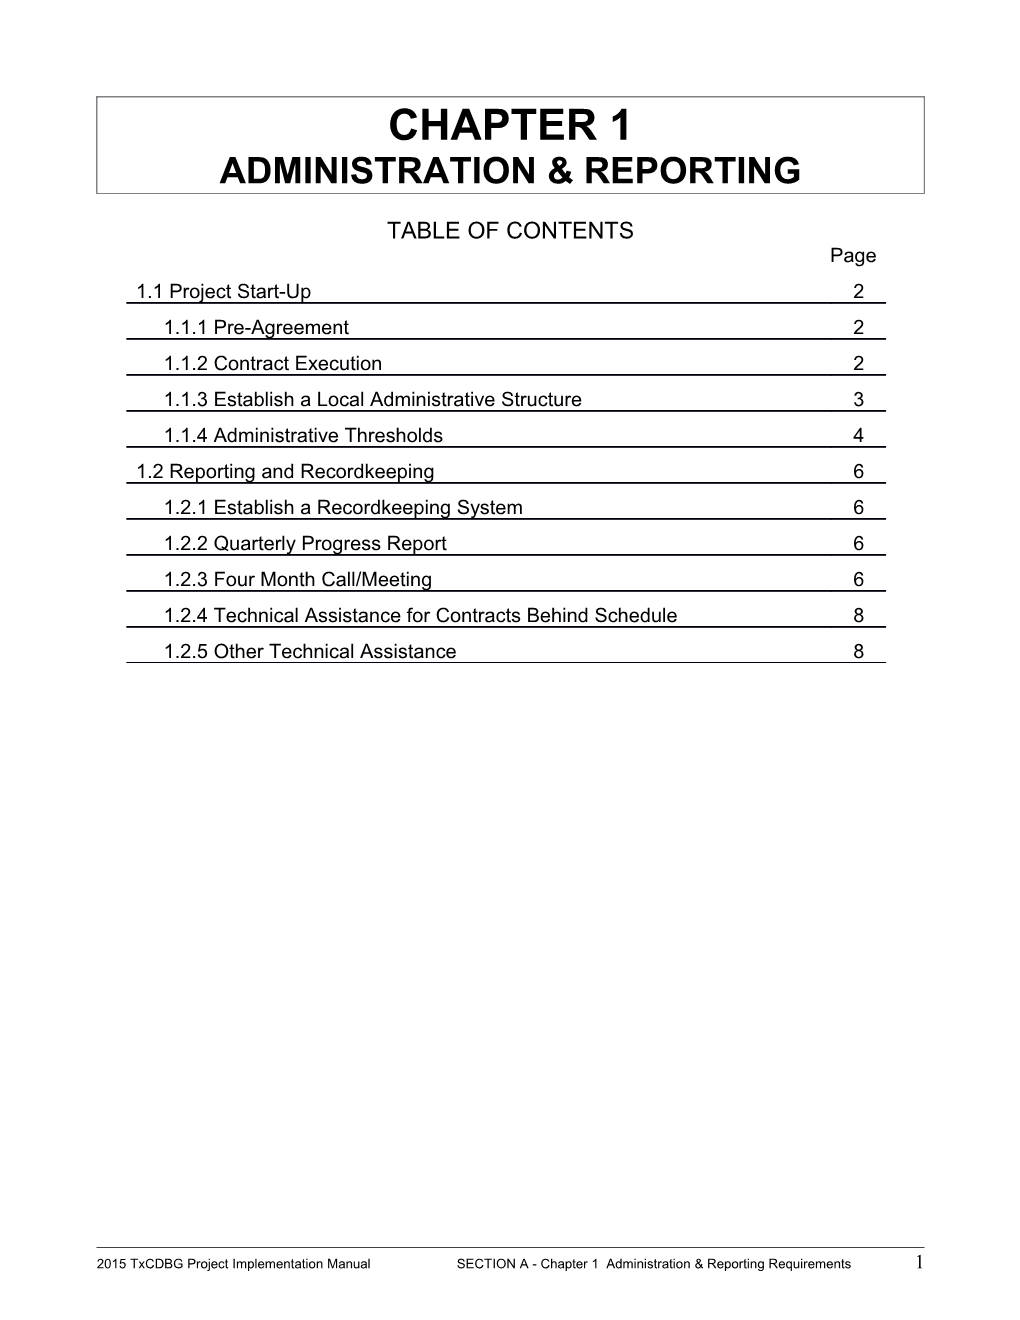 Administration & Reporting